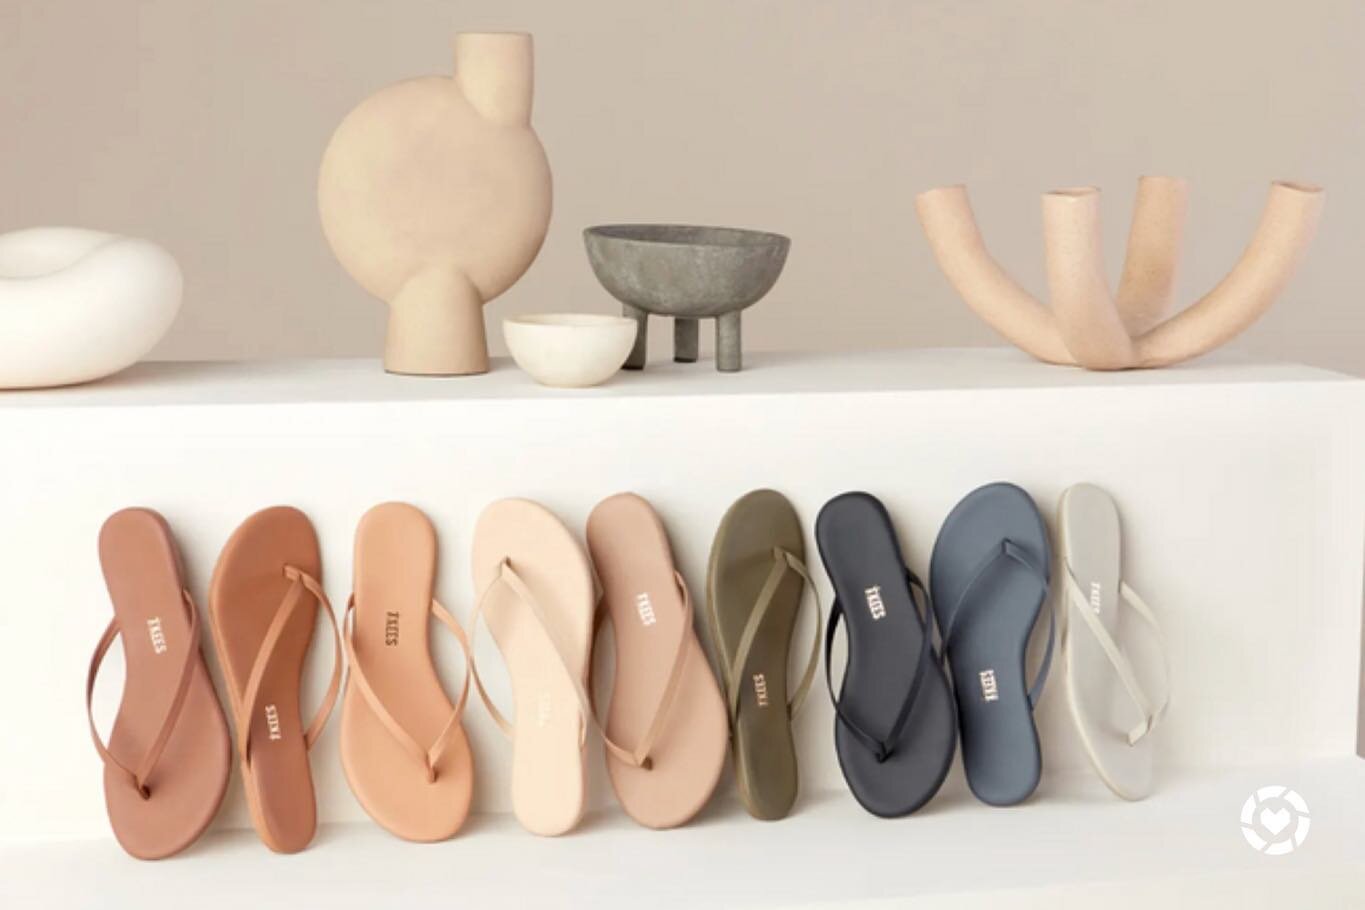 Clean, comfortable and cruelty-free slides are a must for spring and summer but actually finding them can prove to be a bit more difficult. The vast majority of sandals are constructed from cow skin. Enter the @tkees VEGAN sandal. These are not new b